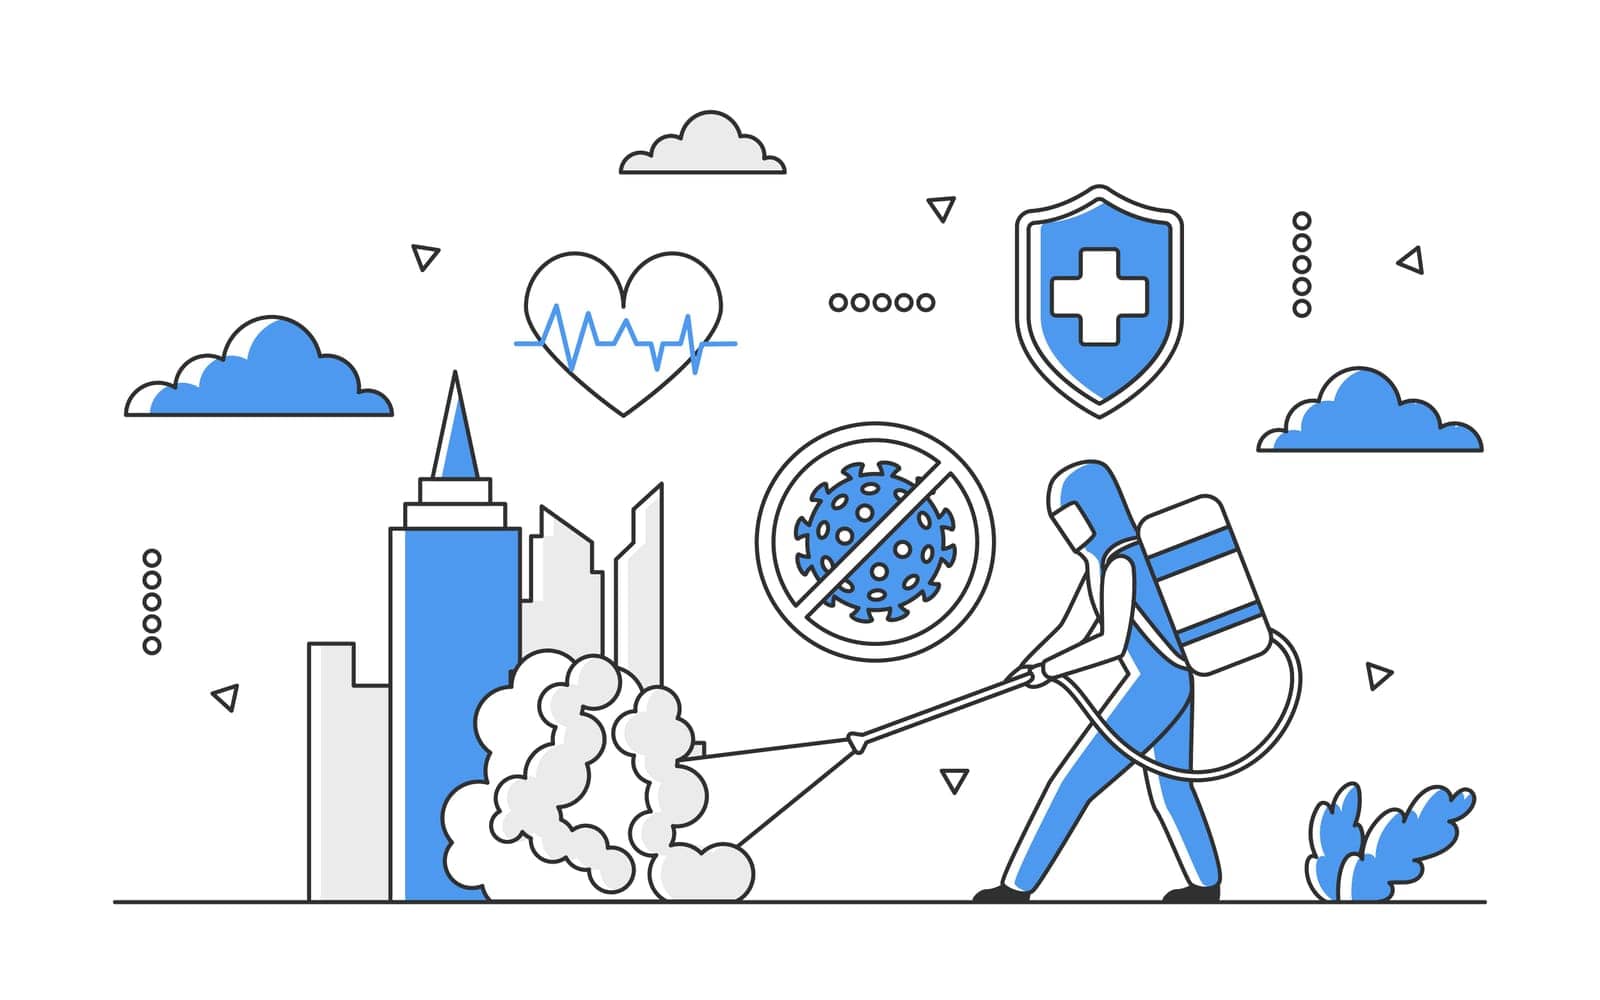 Equipped man spraying disinfectant in public spaces. Protective measures against pandemic coronavirus vector monocolor illustration